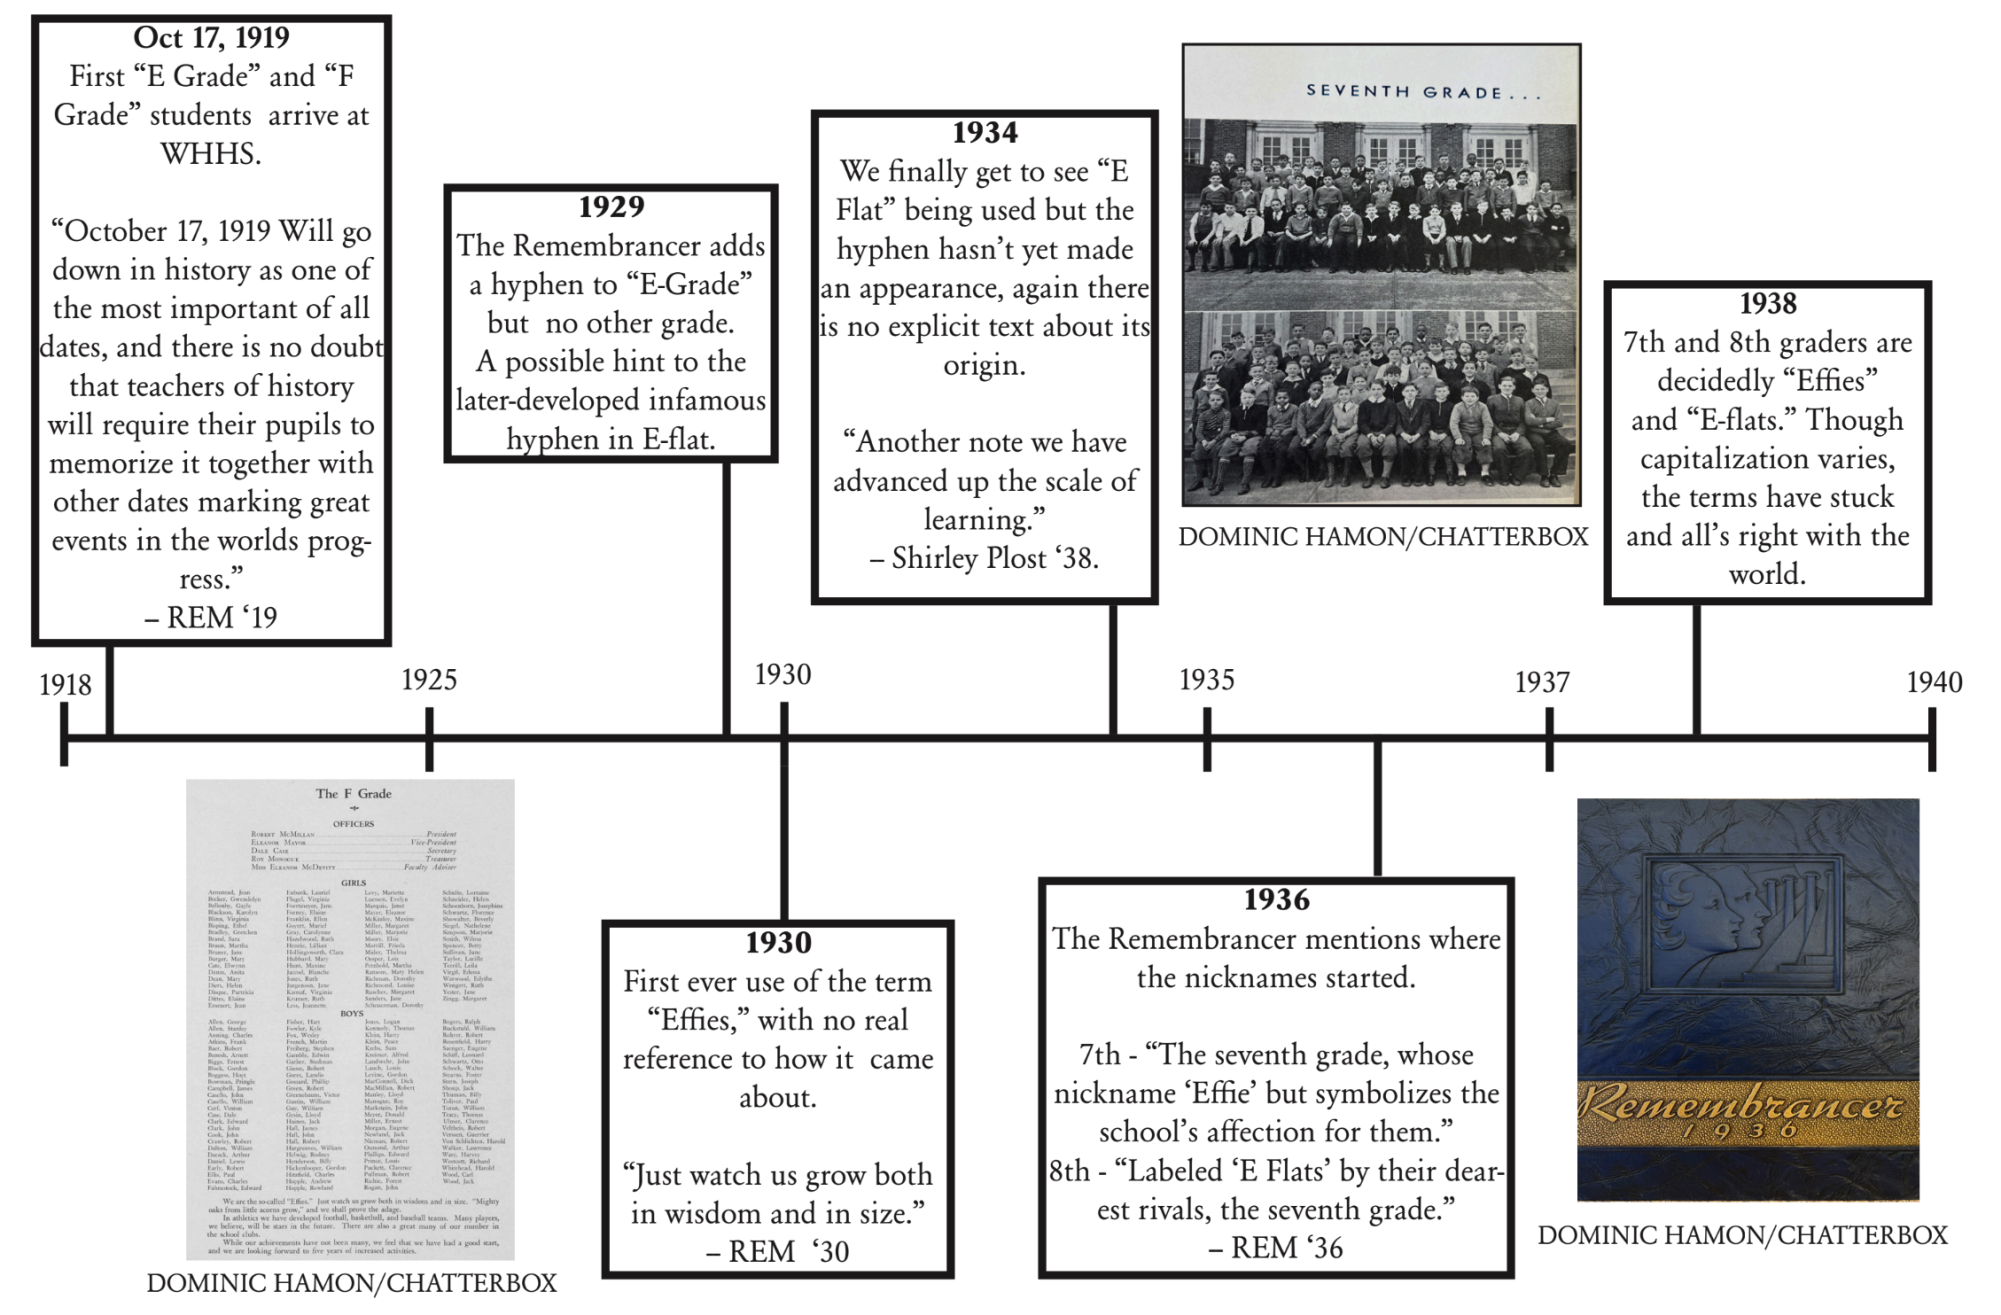 A visual timelines of when the terms "Effies" and "E-flats" started to become used at Walnut Hills High School (Dom)